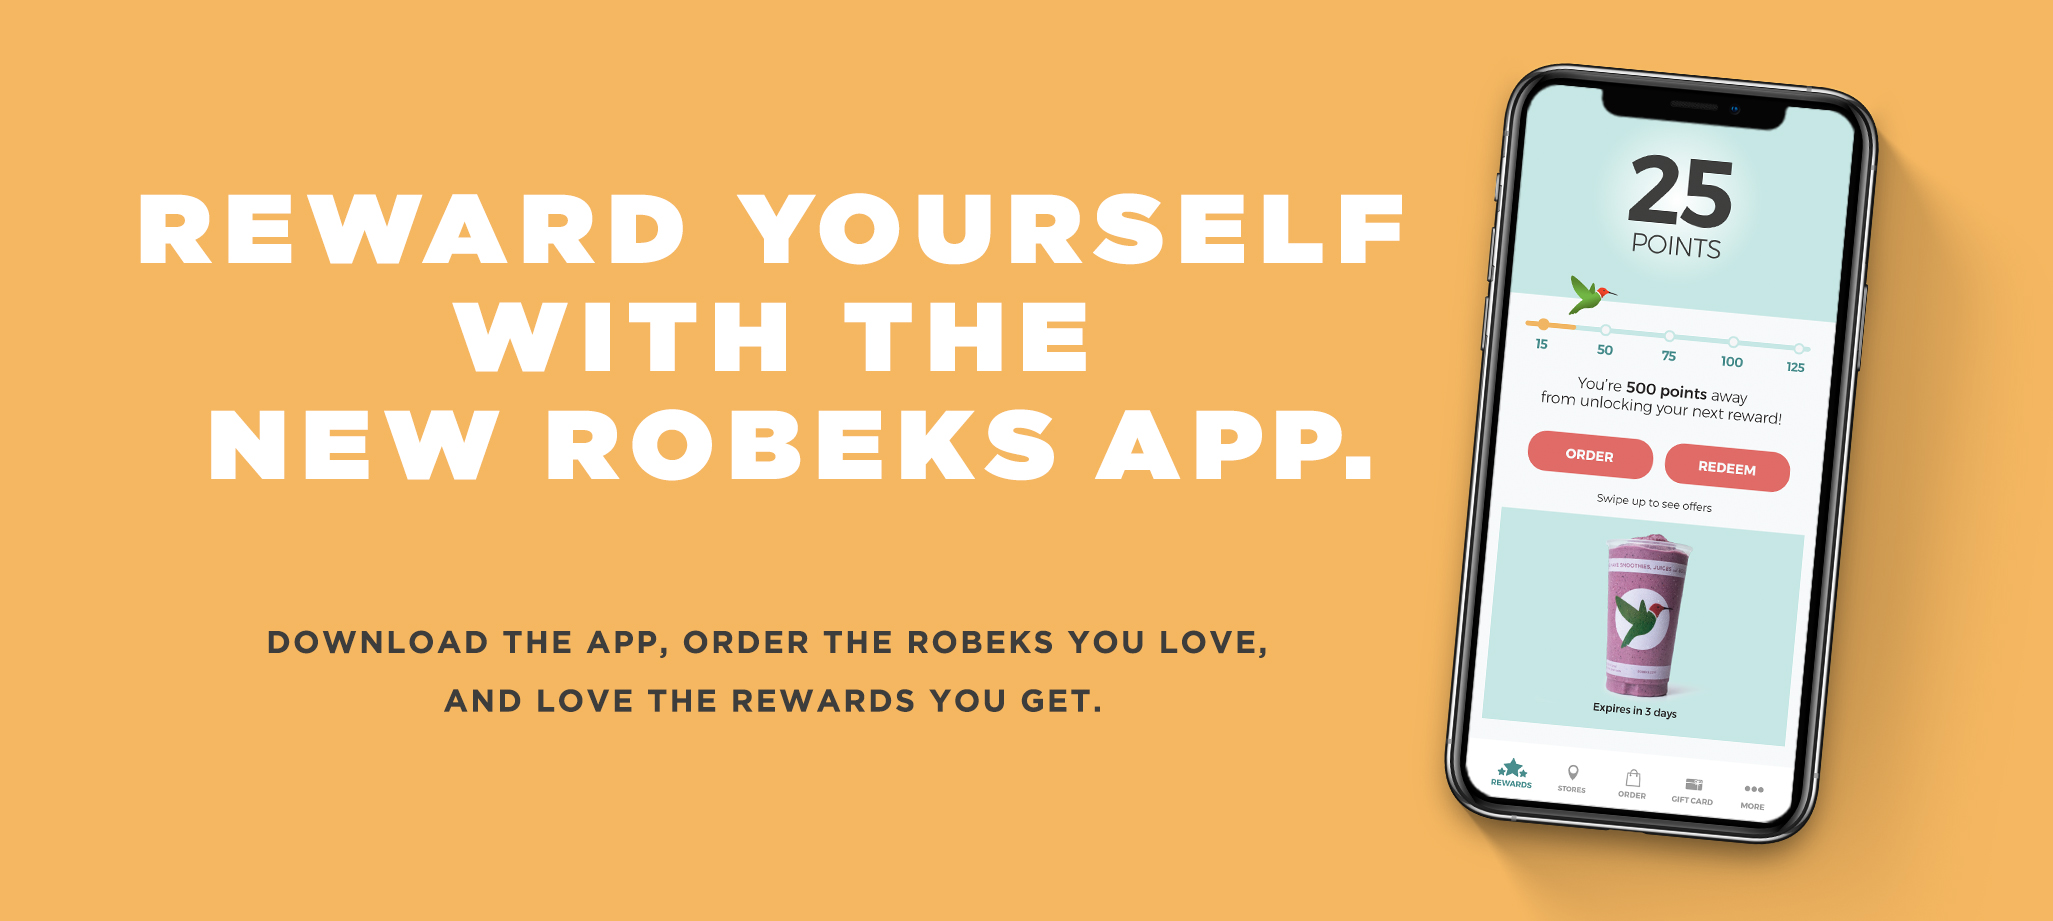 Reward yourself with the Robeks App